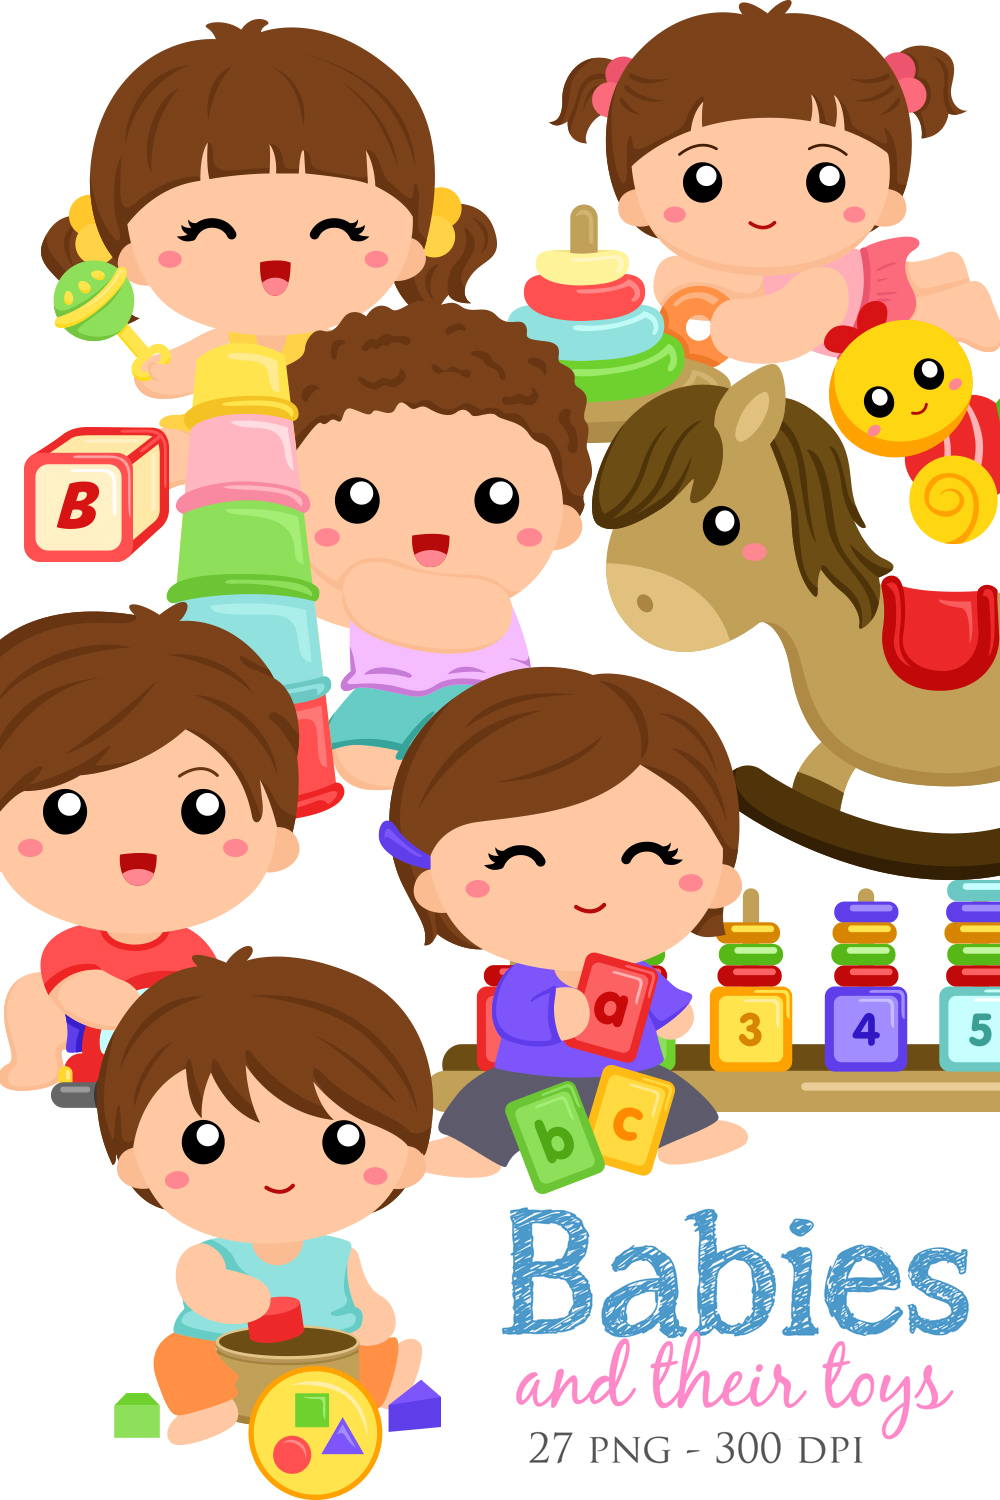 Cute Babies and Toys Clipart Illustrations pinterest image.